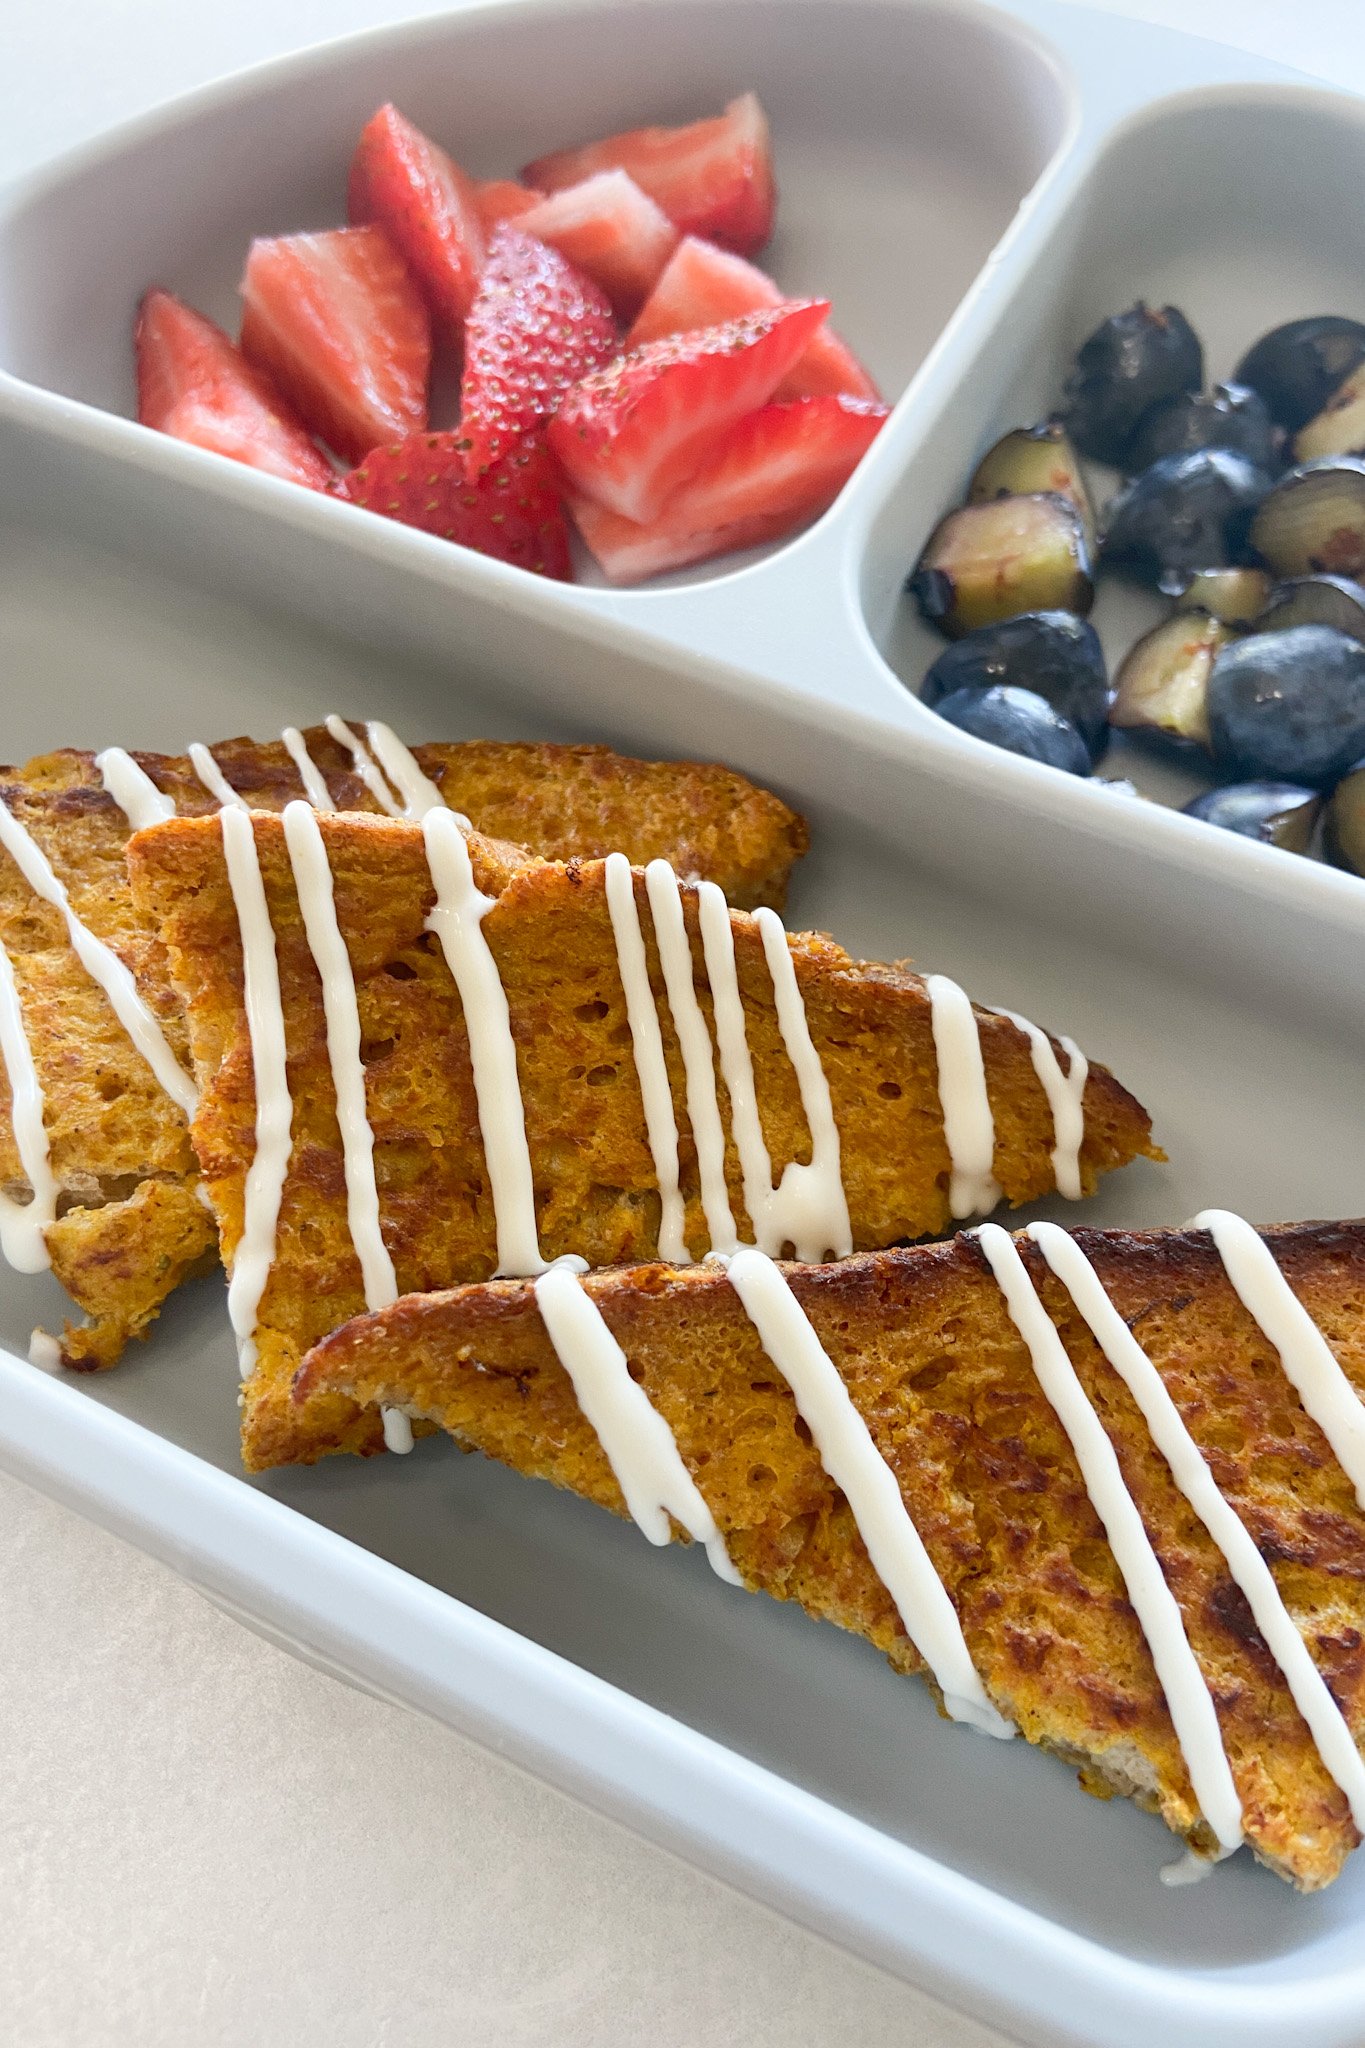 Pumpkin spiced french toast served with fruits.